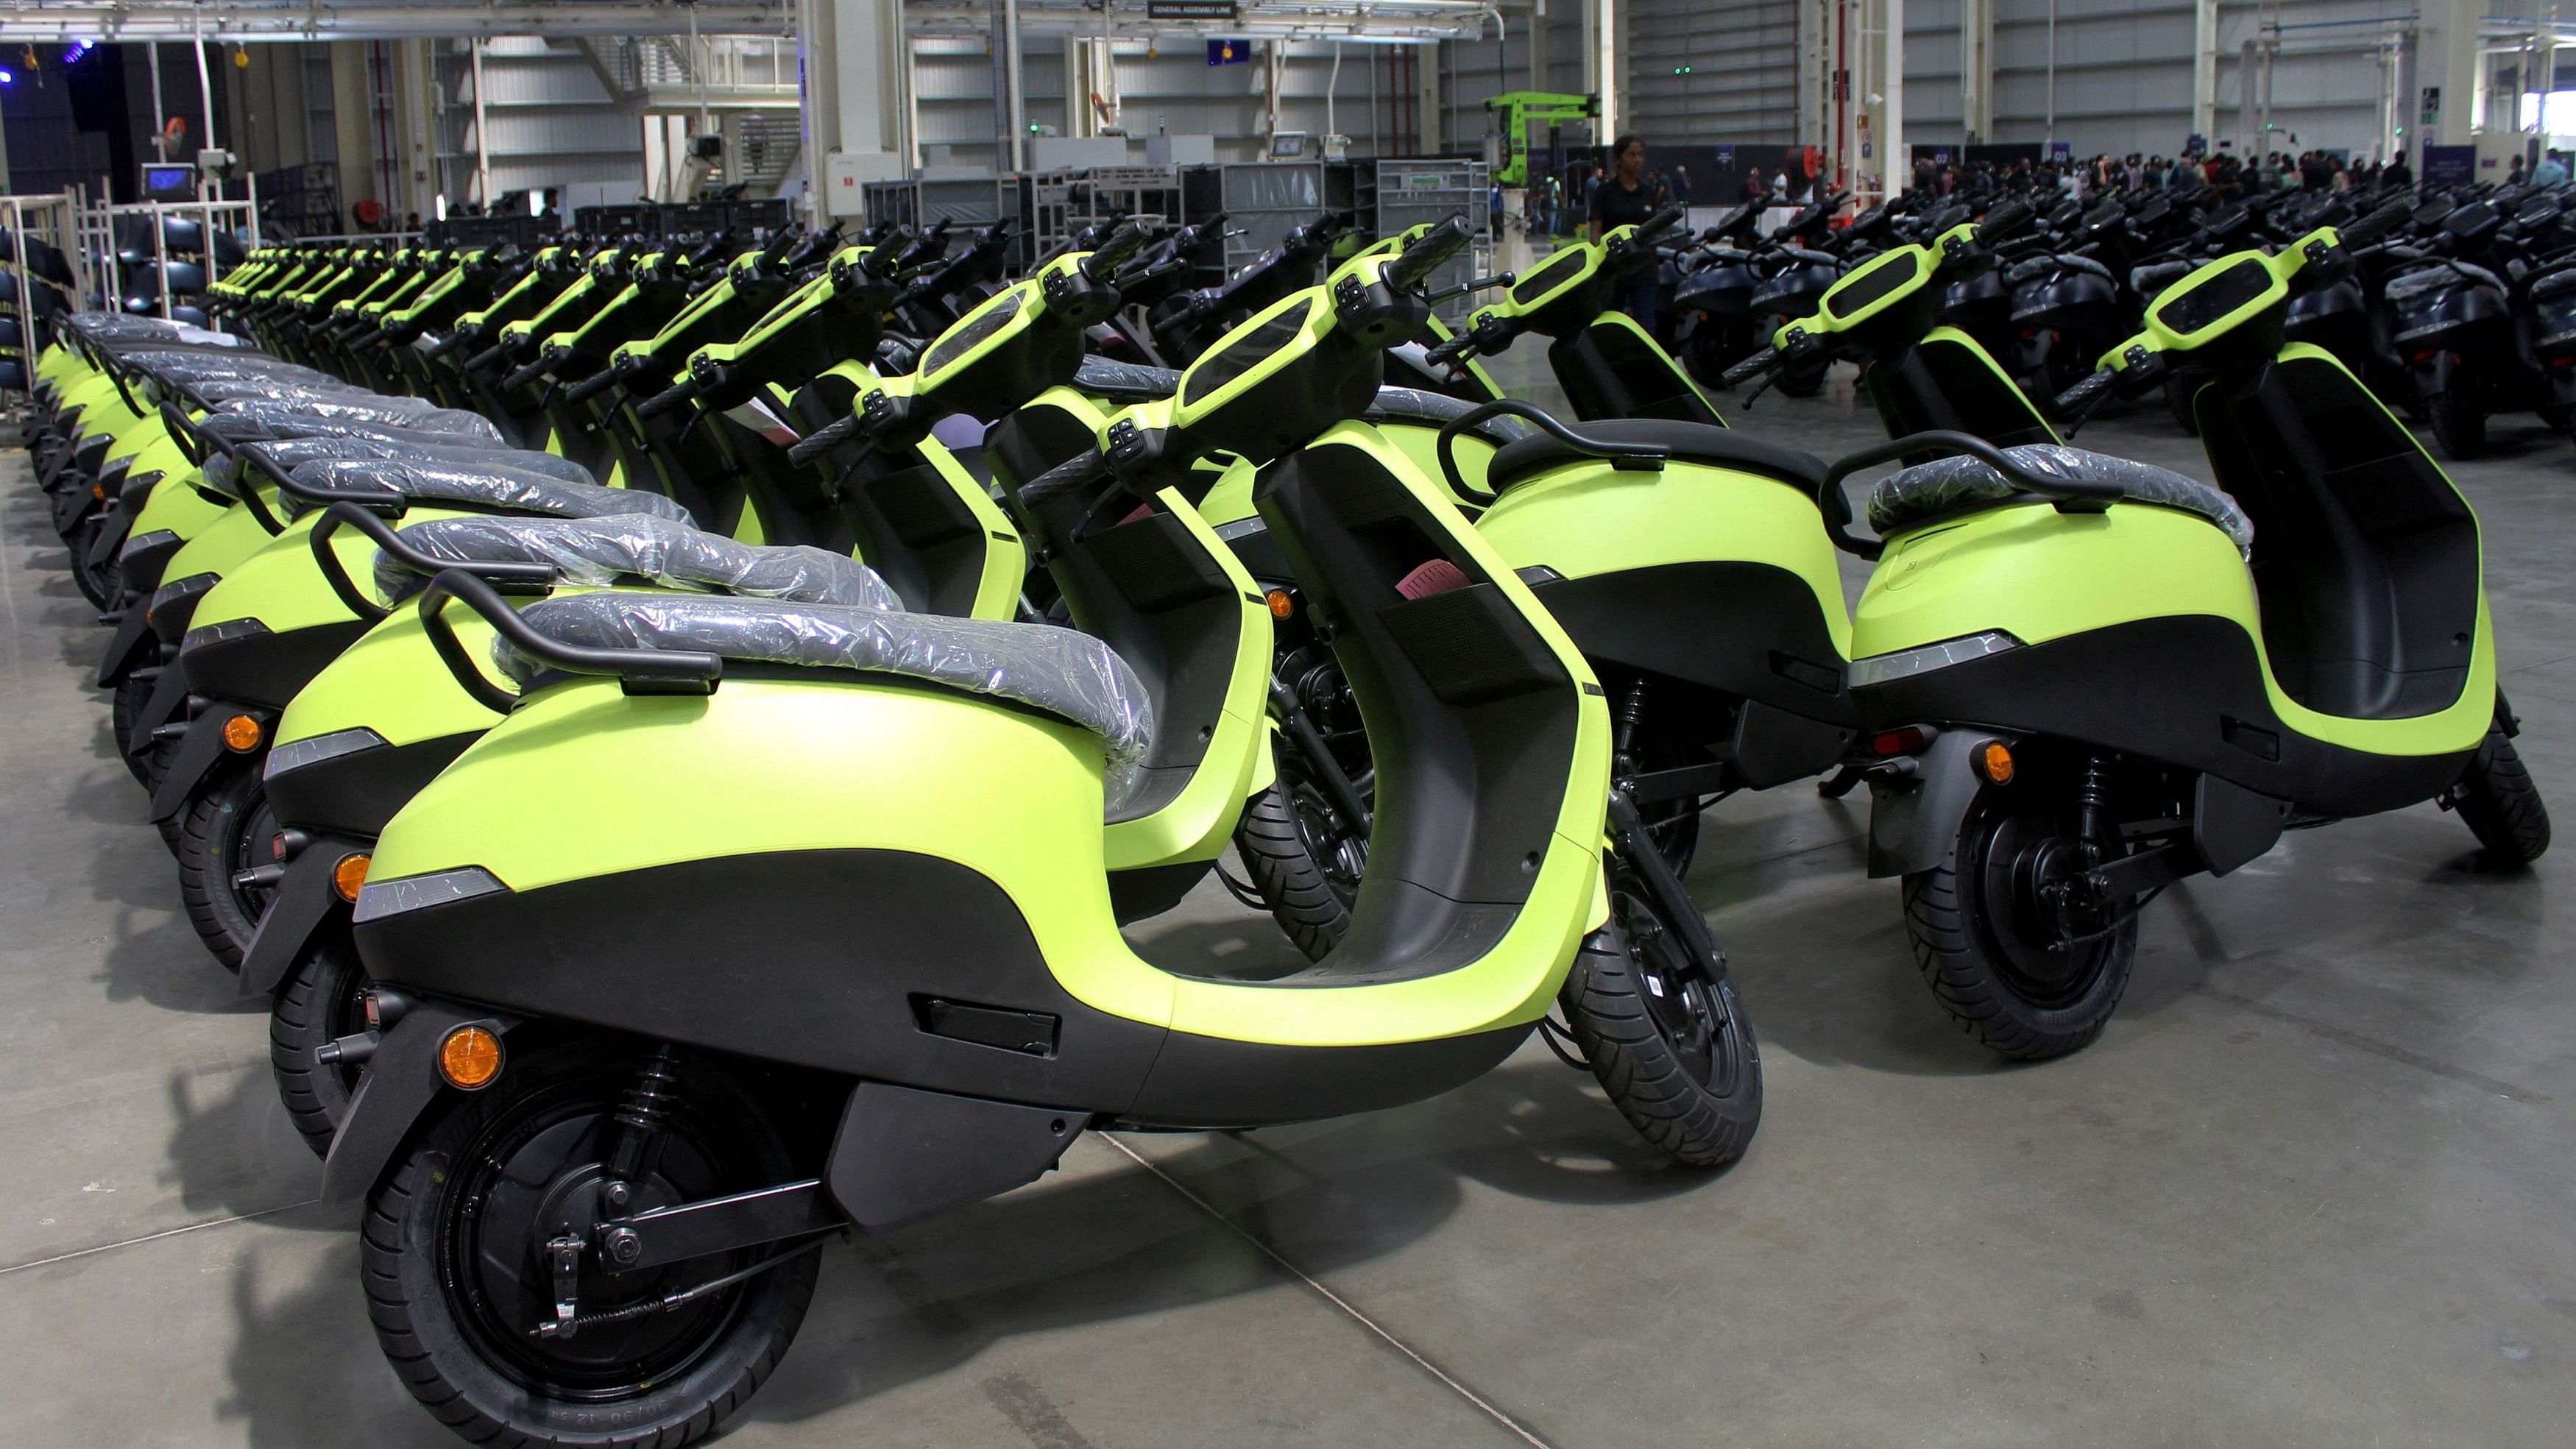 <div class="paragraphs"><p>Ola Electric's e-scooters are pictured inside its manufacturing facility.</p></div>